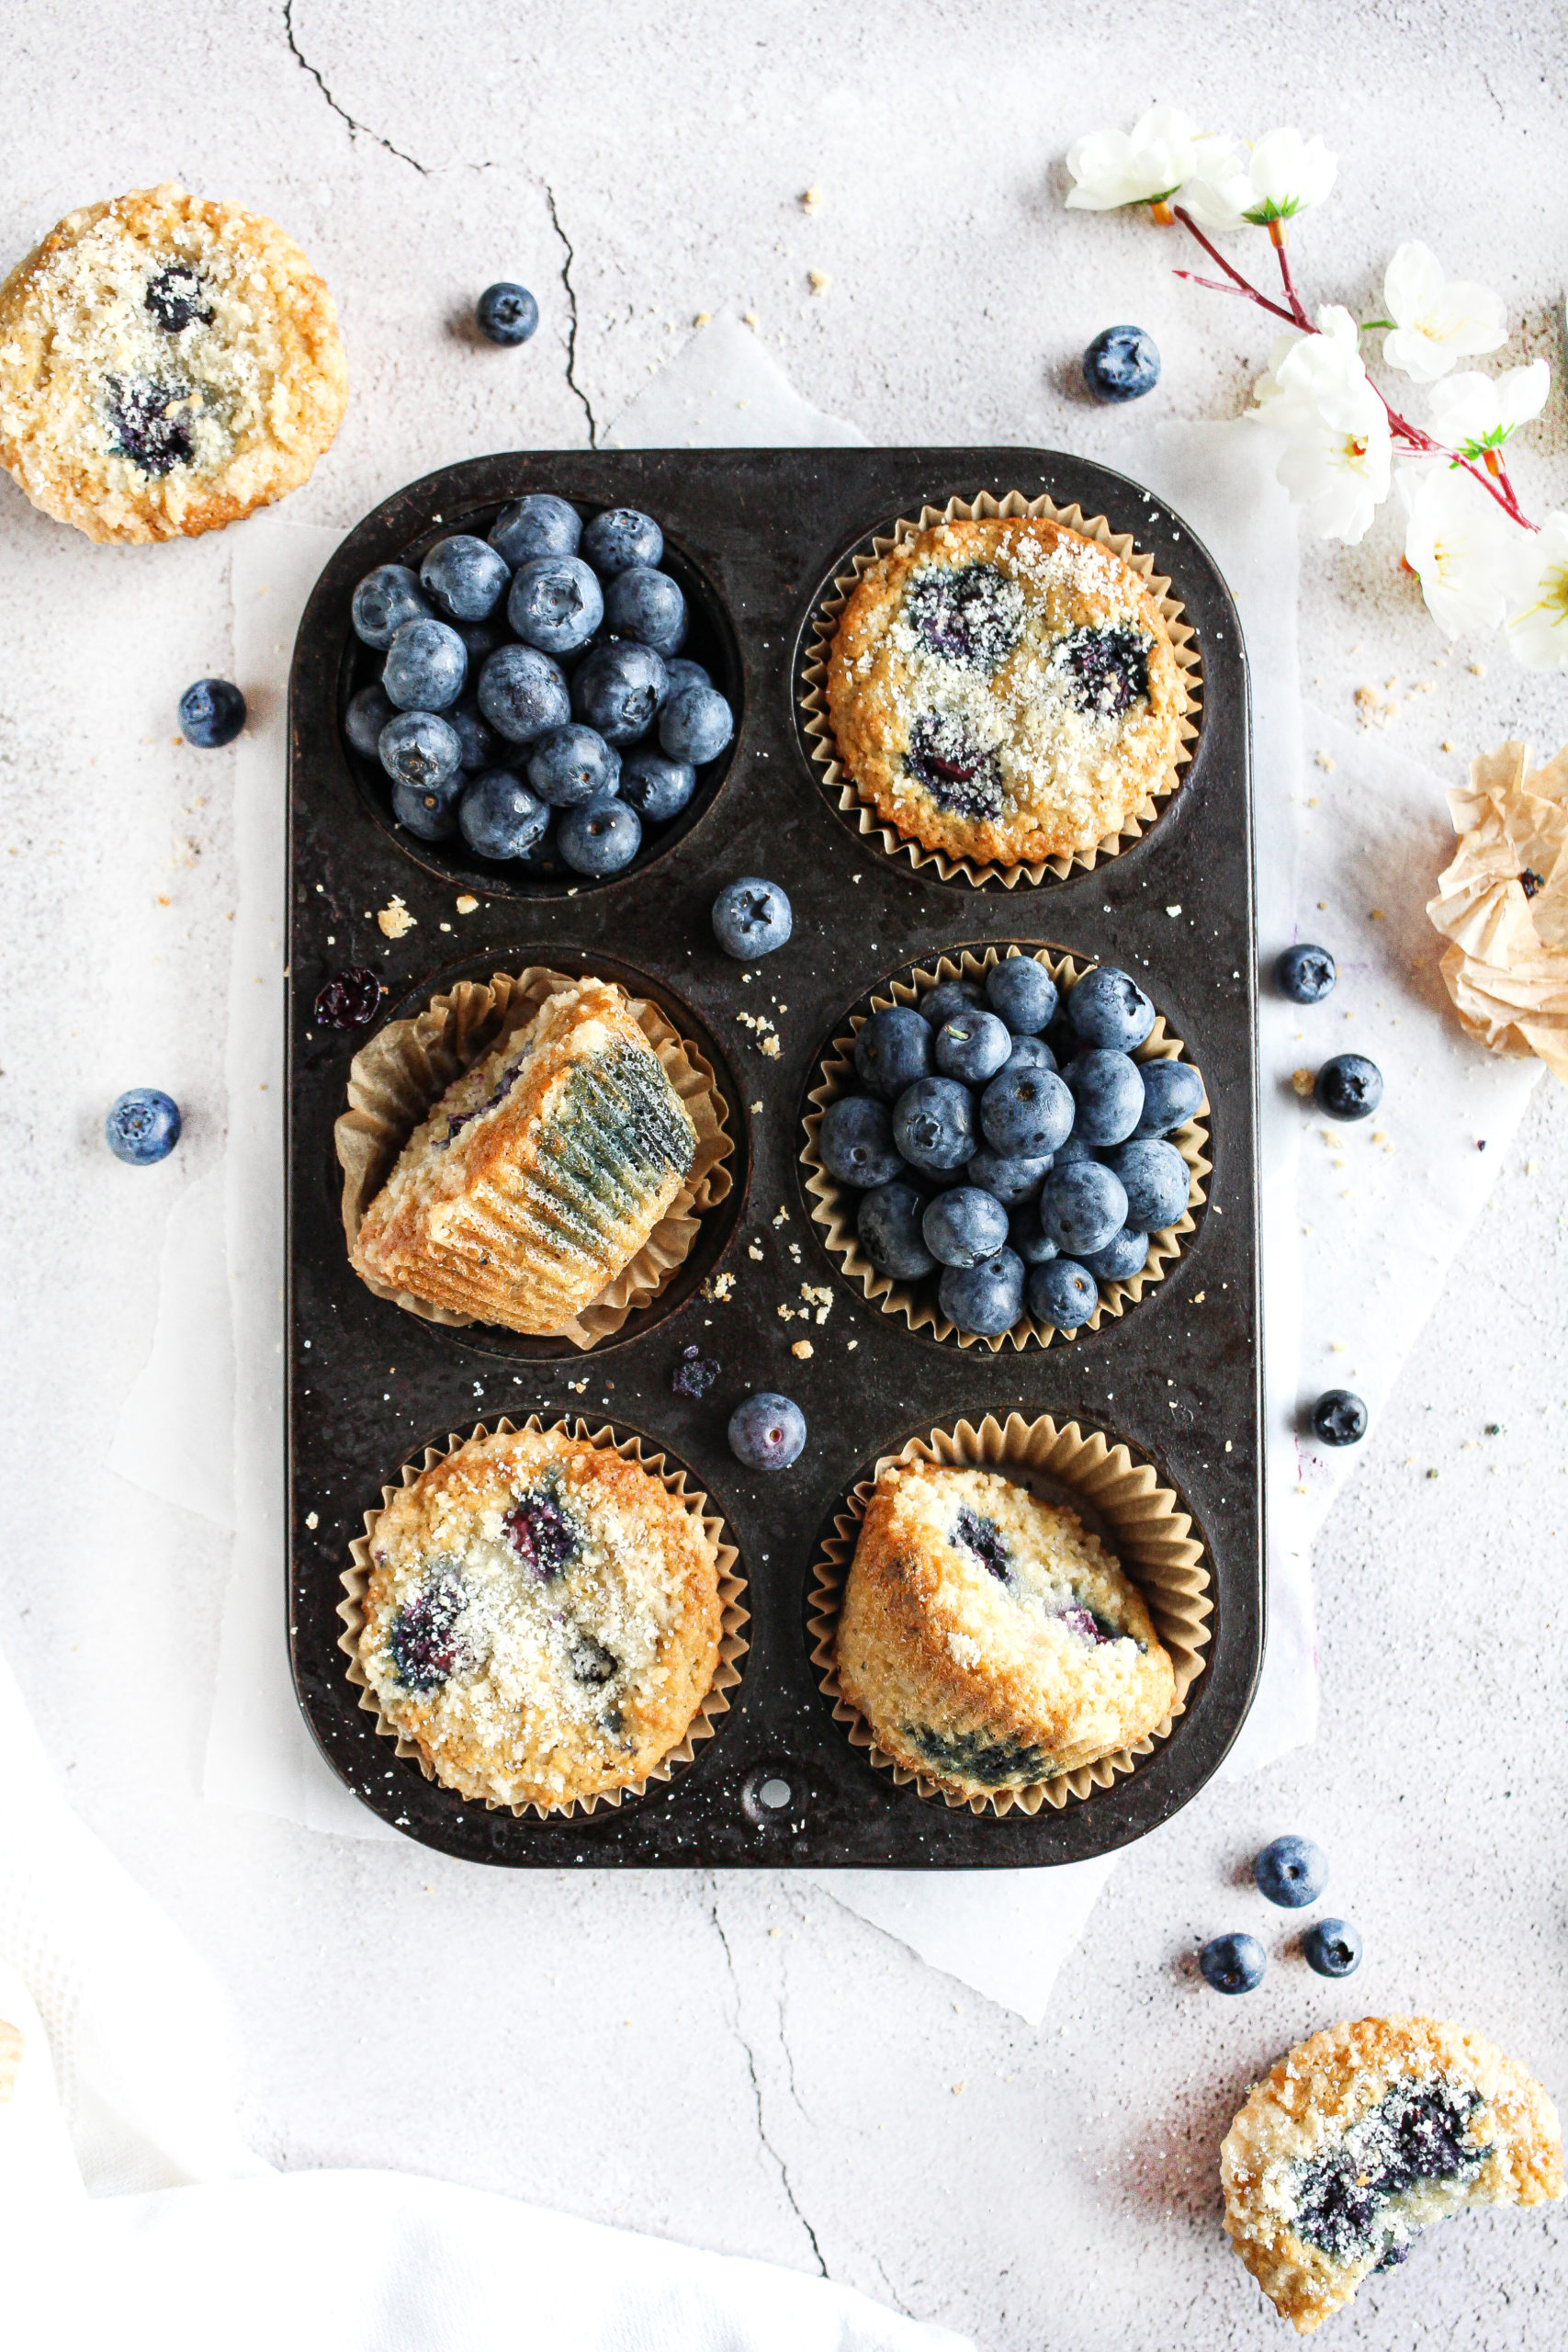 {Low Carb – Gluten Free} Basic Bakery Style Blueberry Coffee Cake Muffins